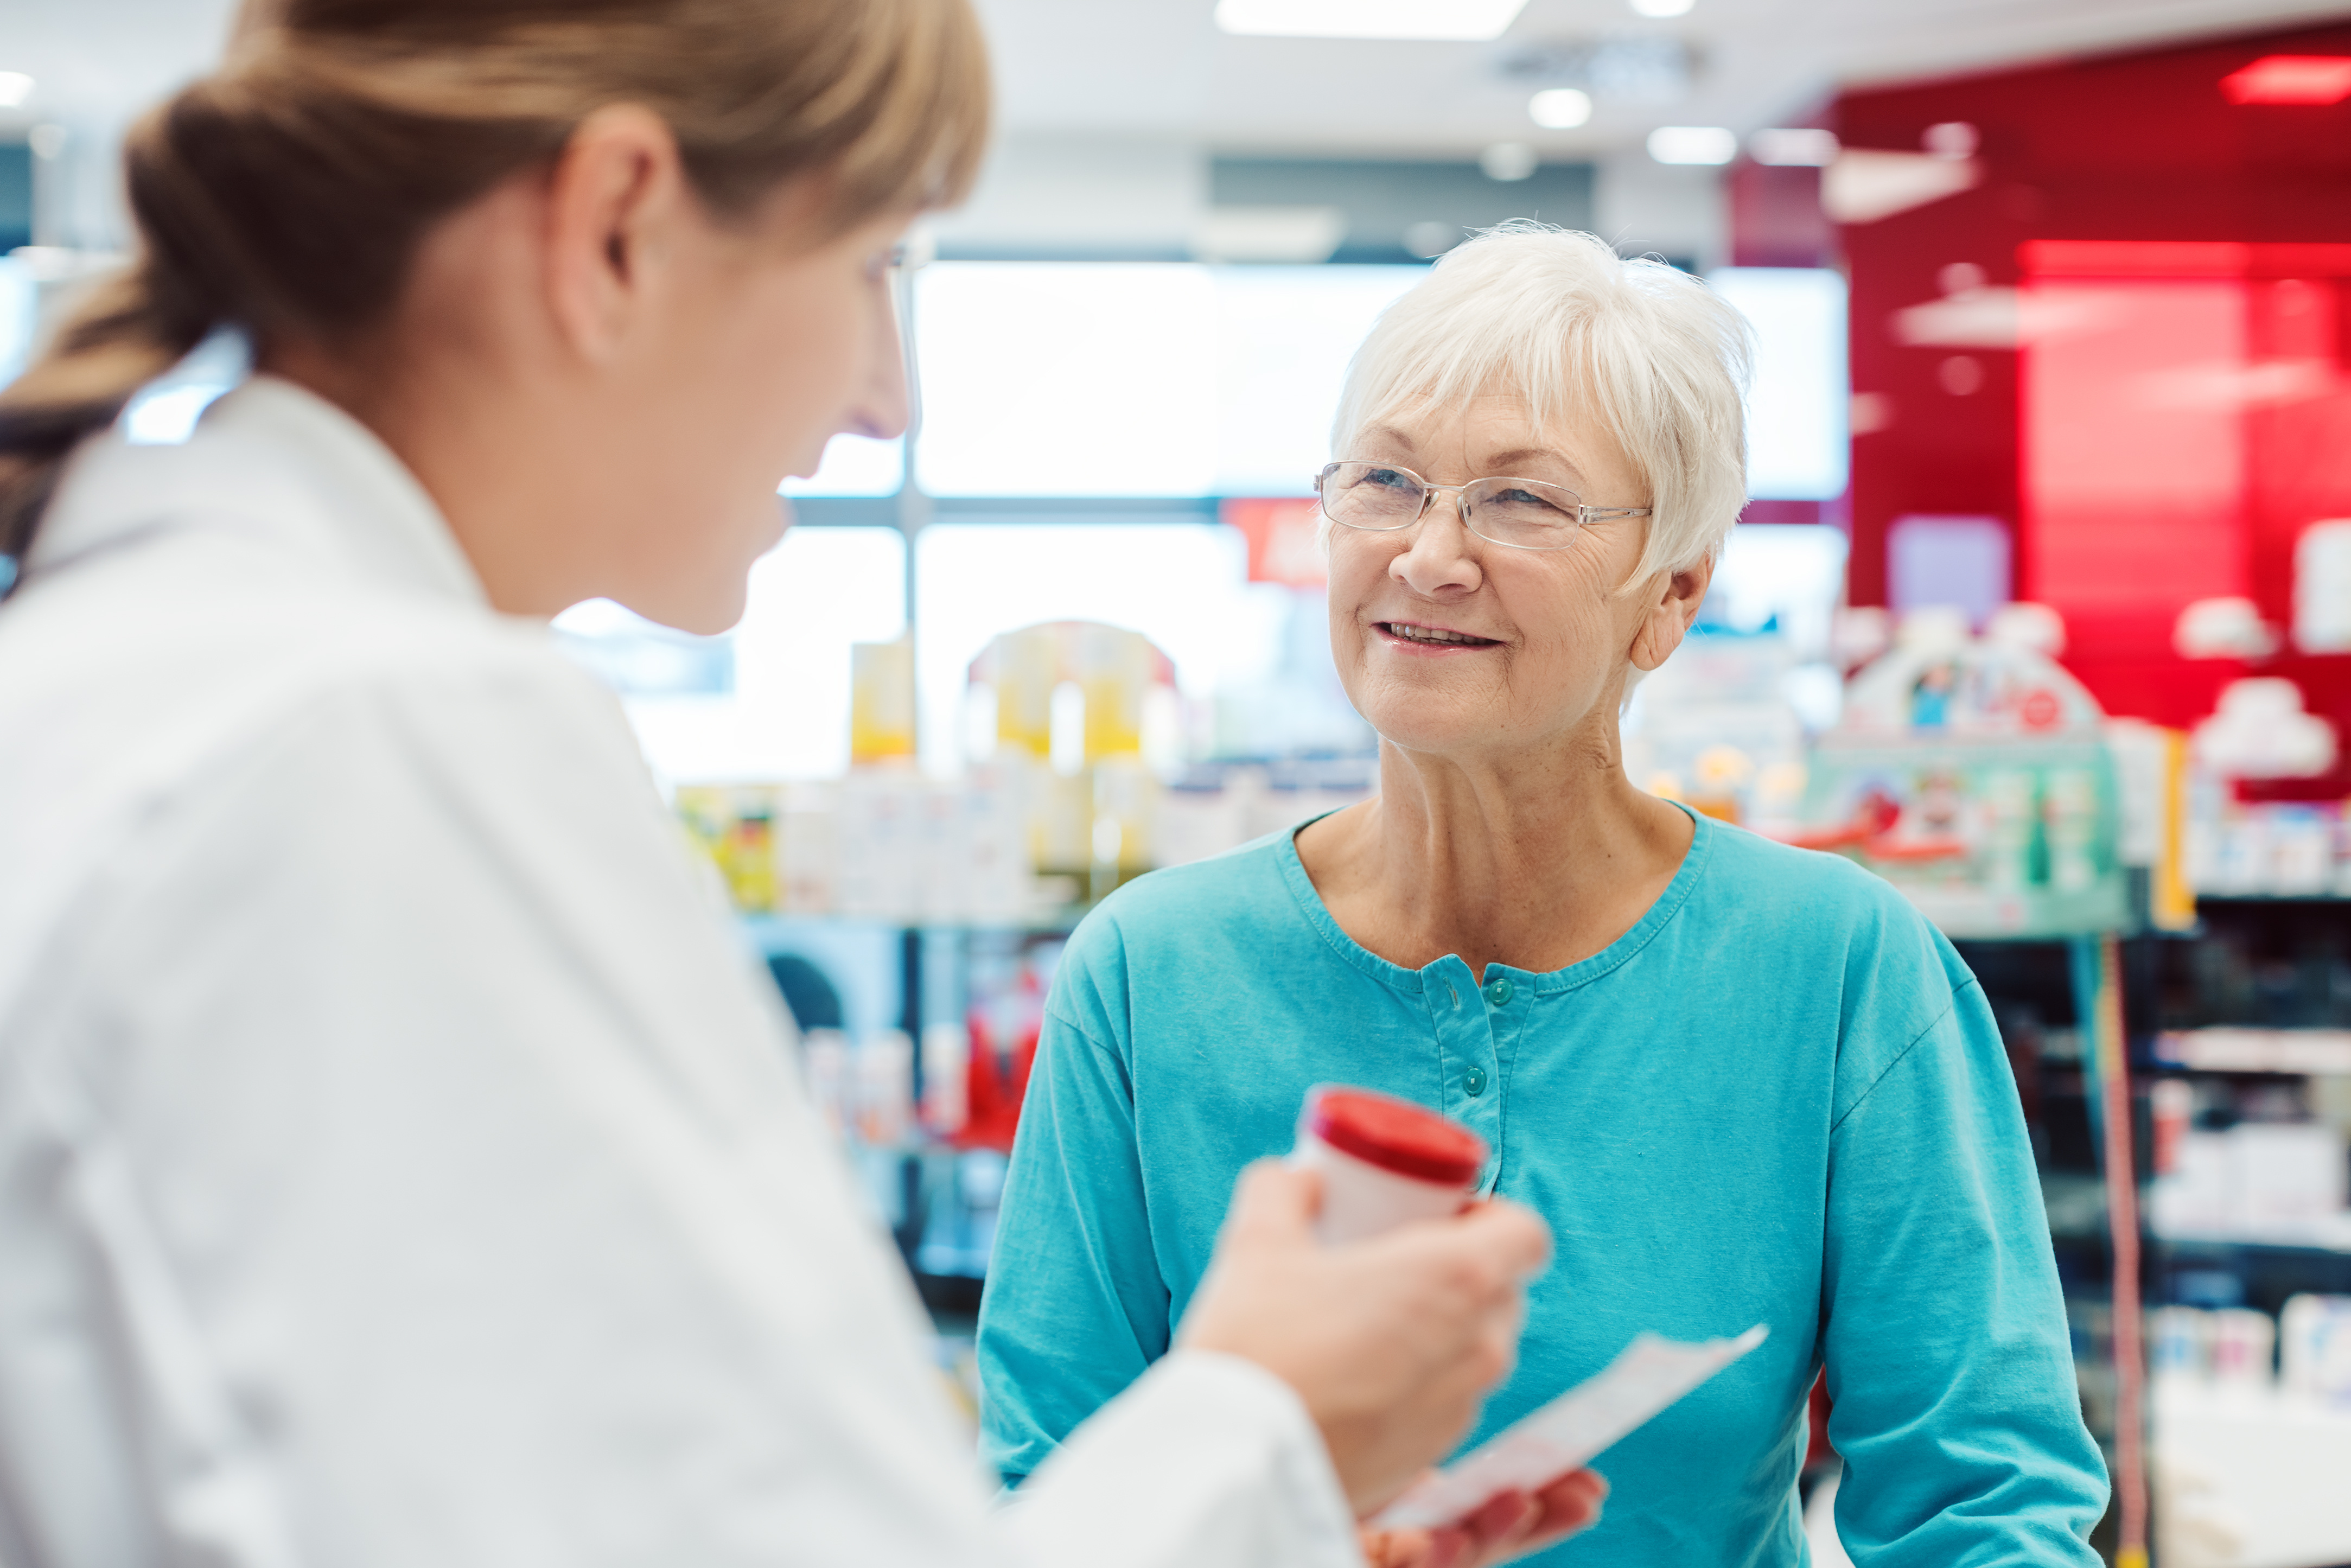 What Should You Look for in a Pharmacy?